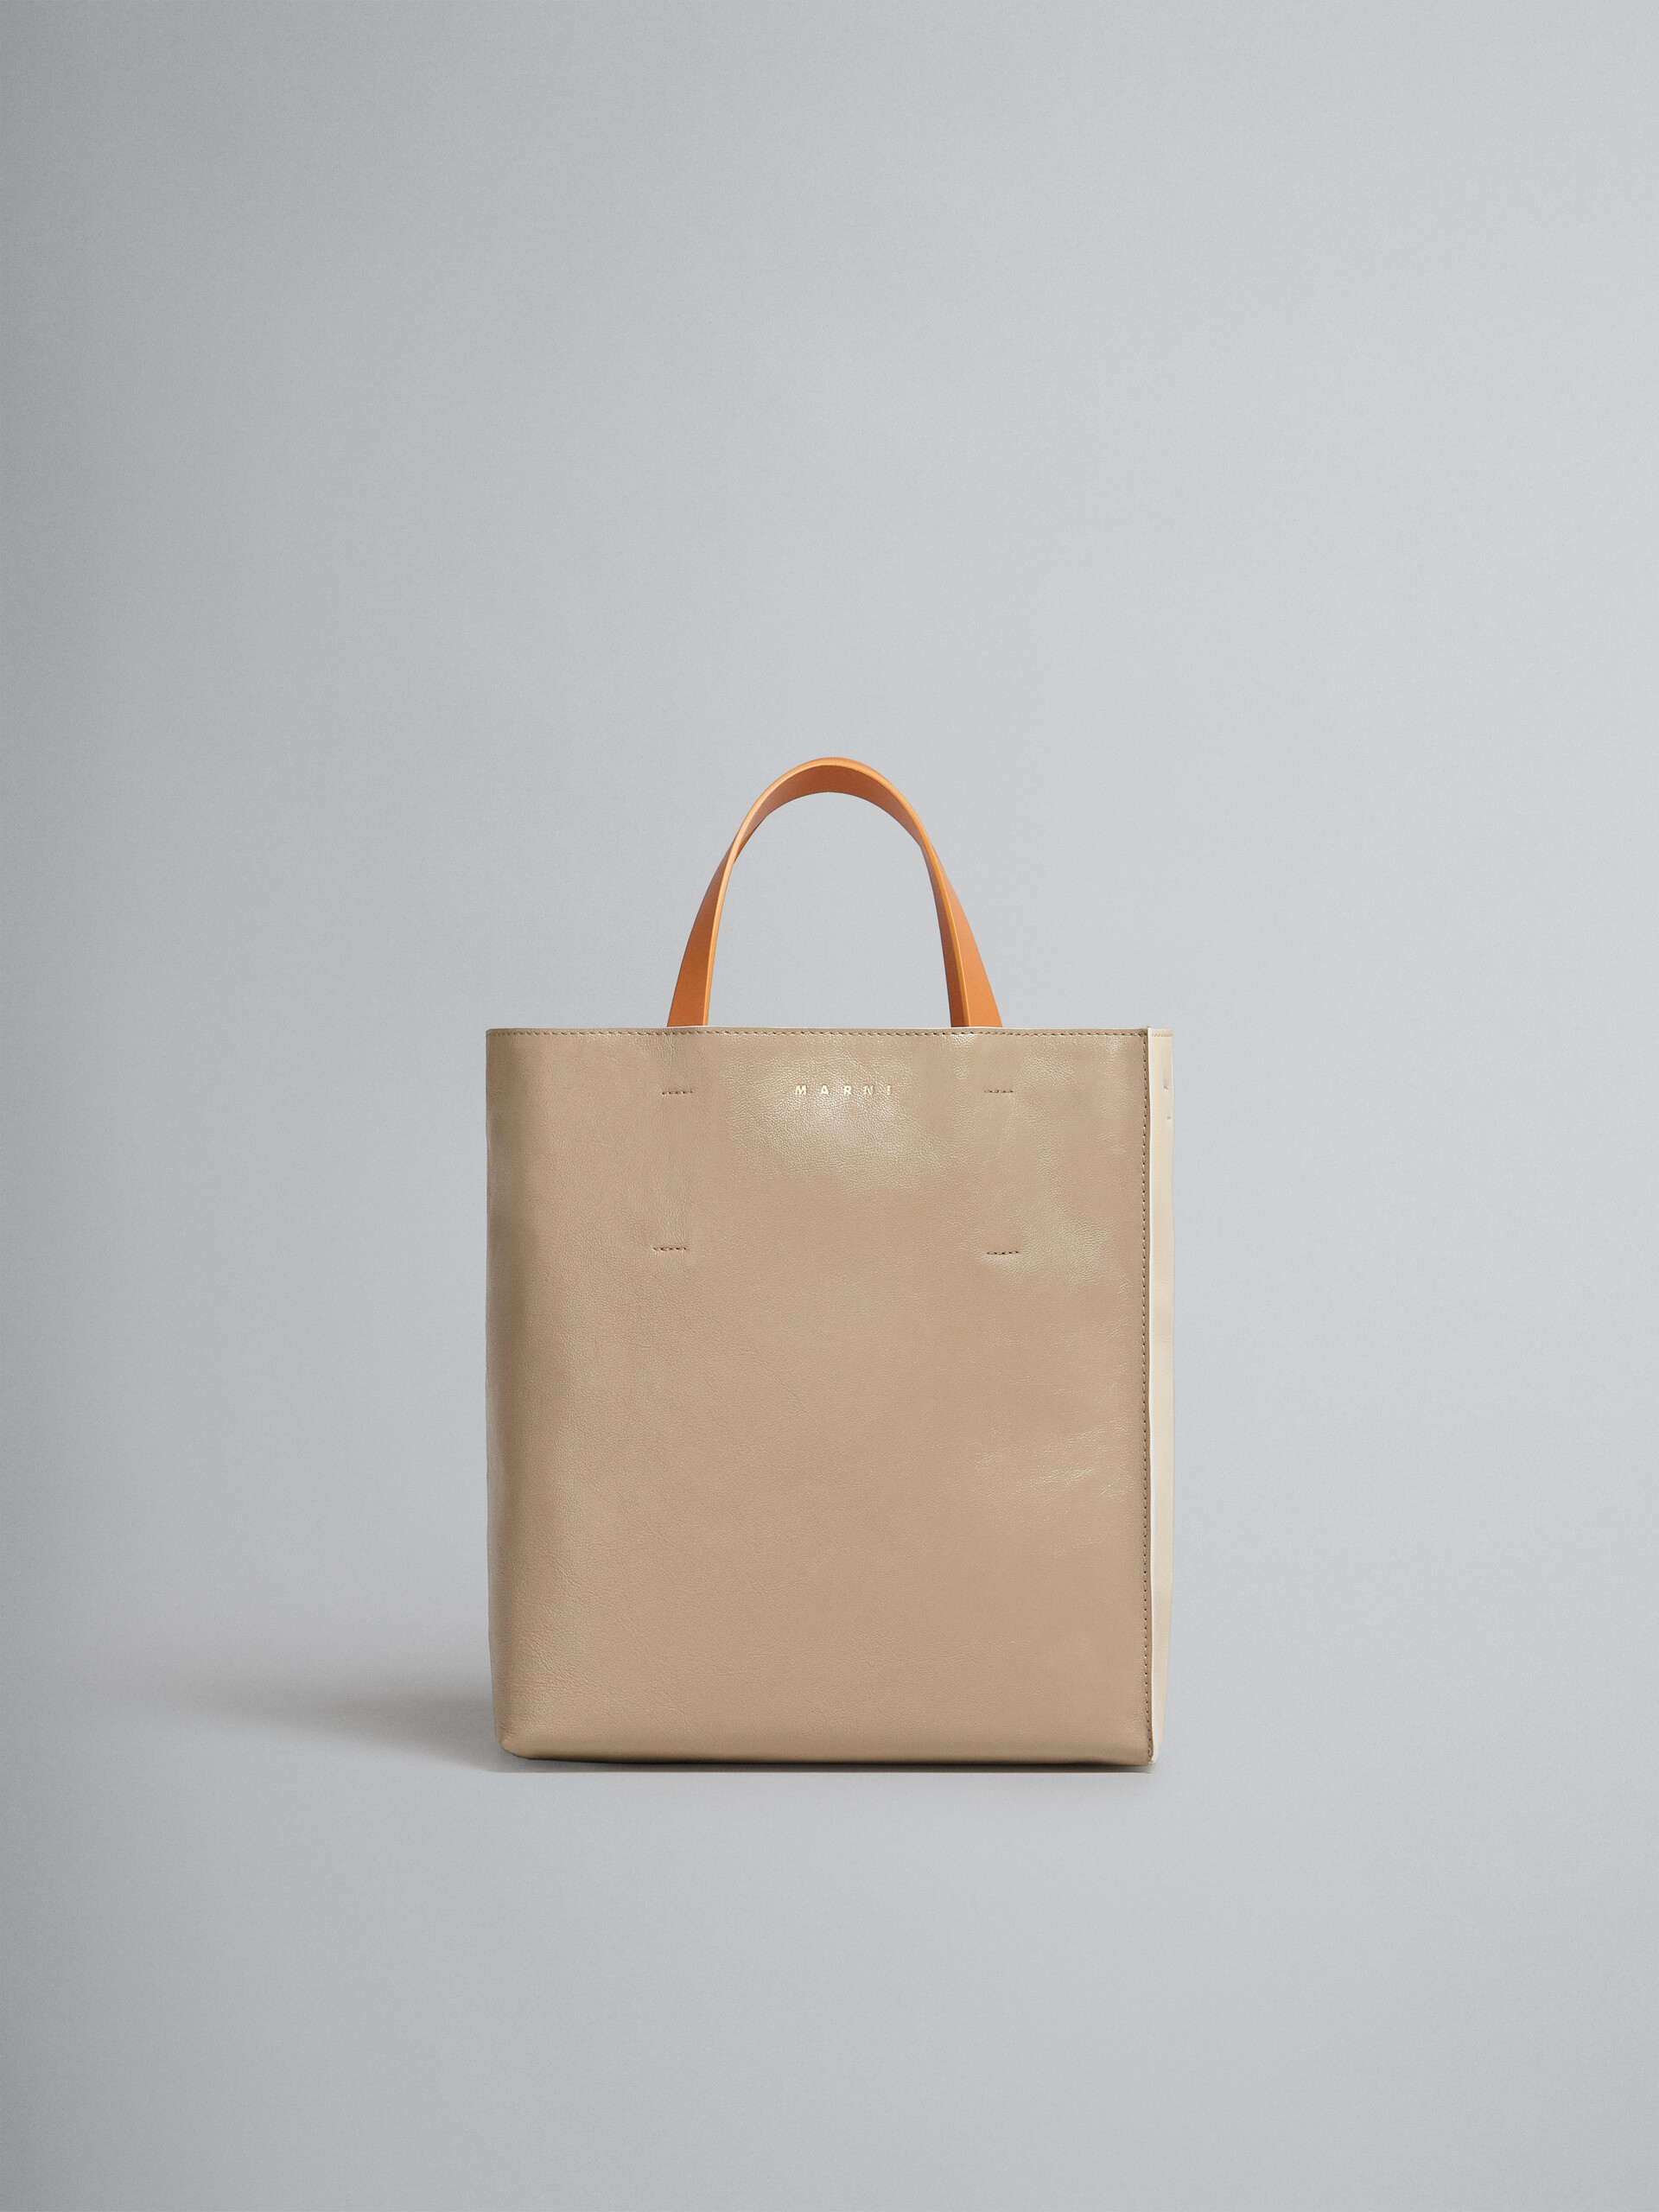 Brown pale blueblack tumbled leather MUSEO SOFT bag - Shopping Bags - Image 1